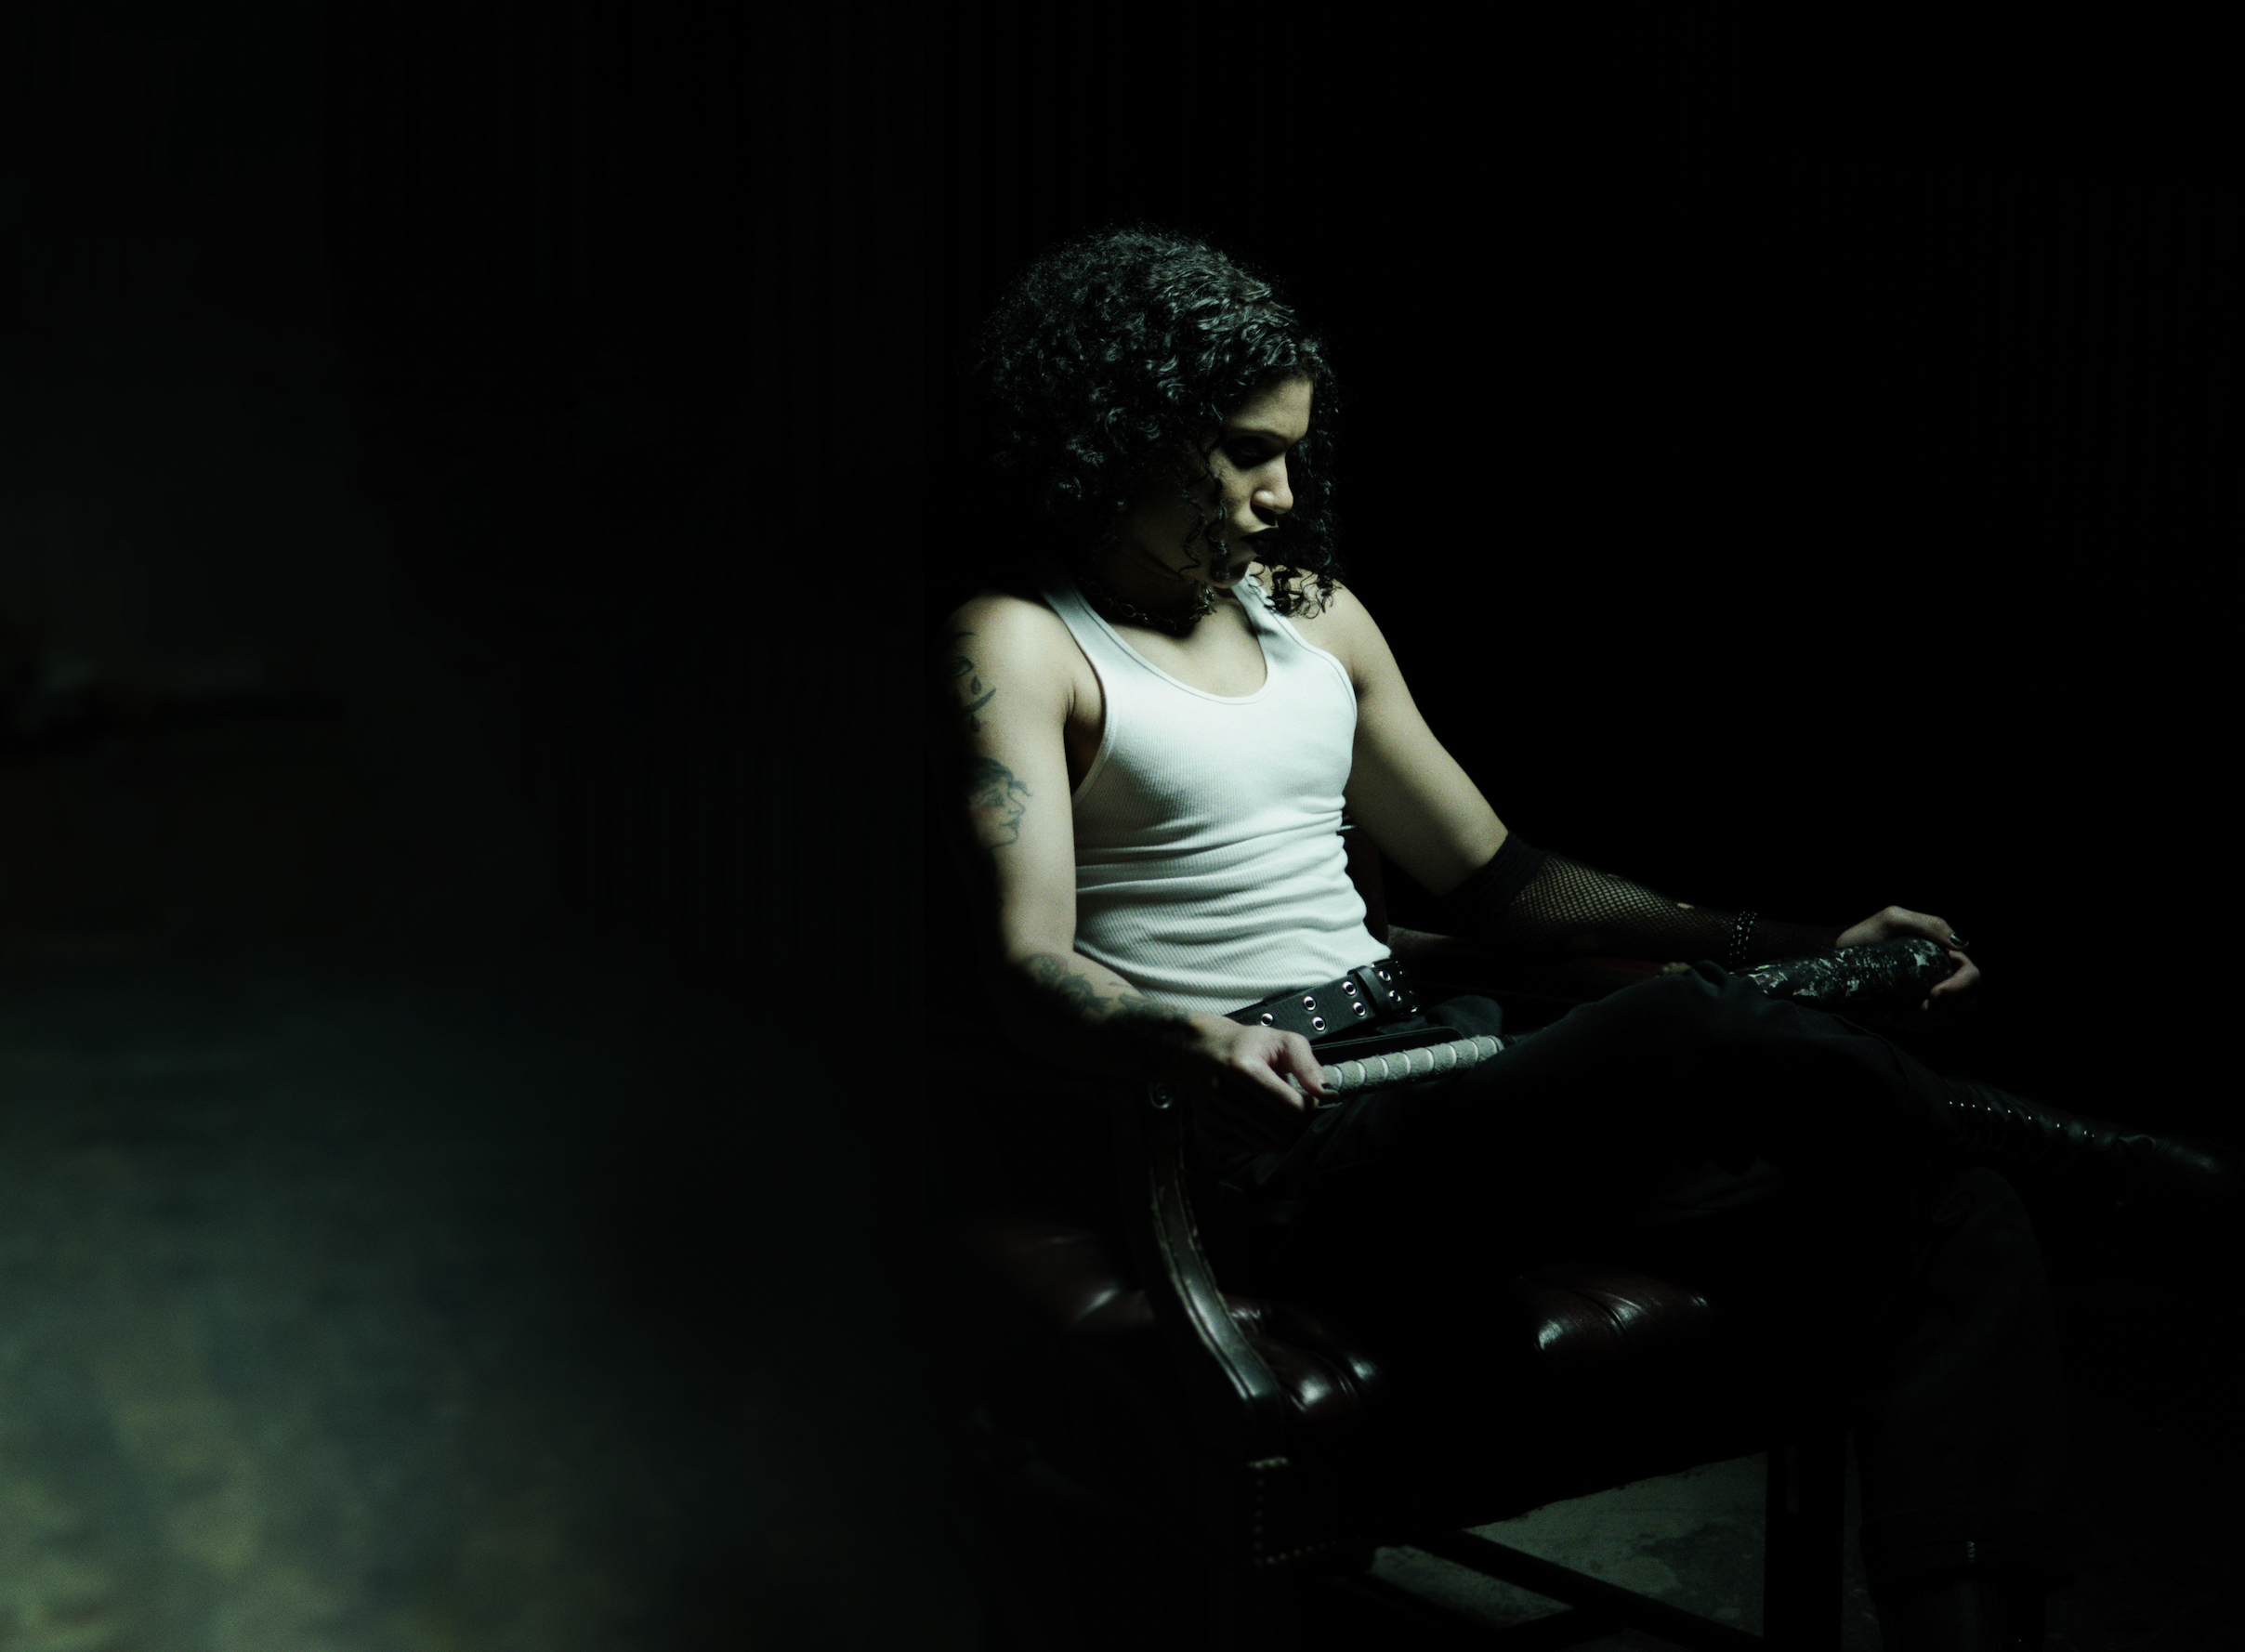 A person with curly hair and tattoos sits on a leather chair in a dimly lit room, contemplatively looking downward, resembling a scene from a Bloodbather music video.